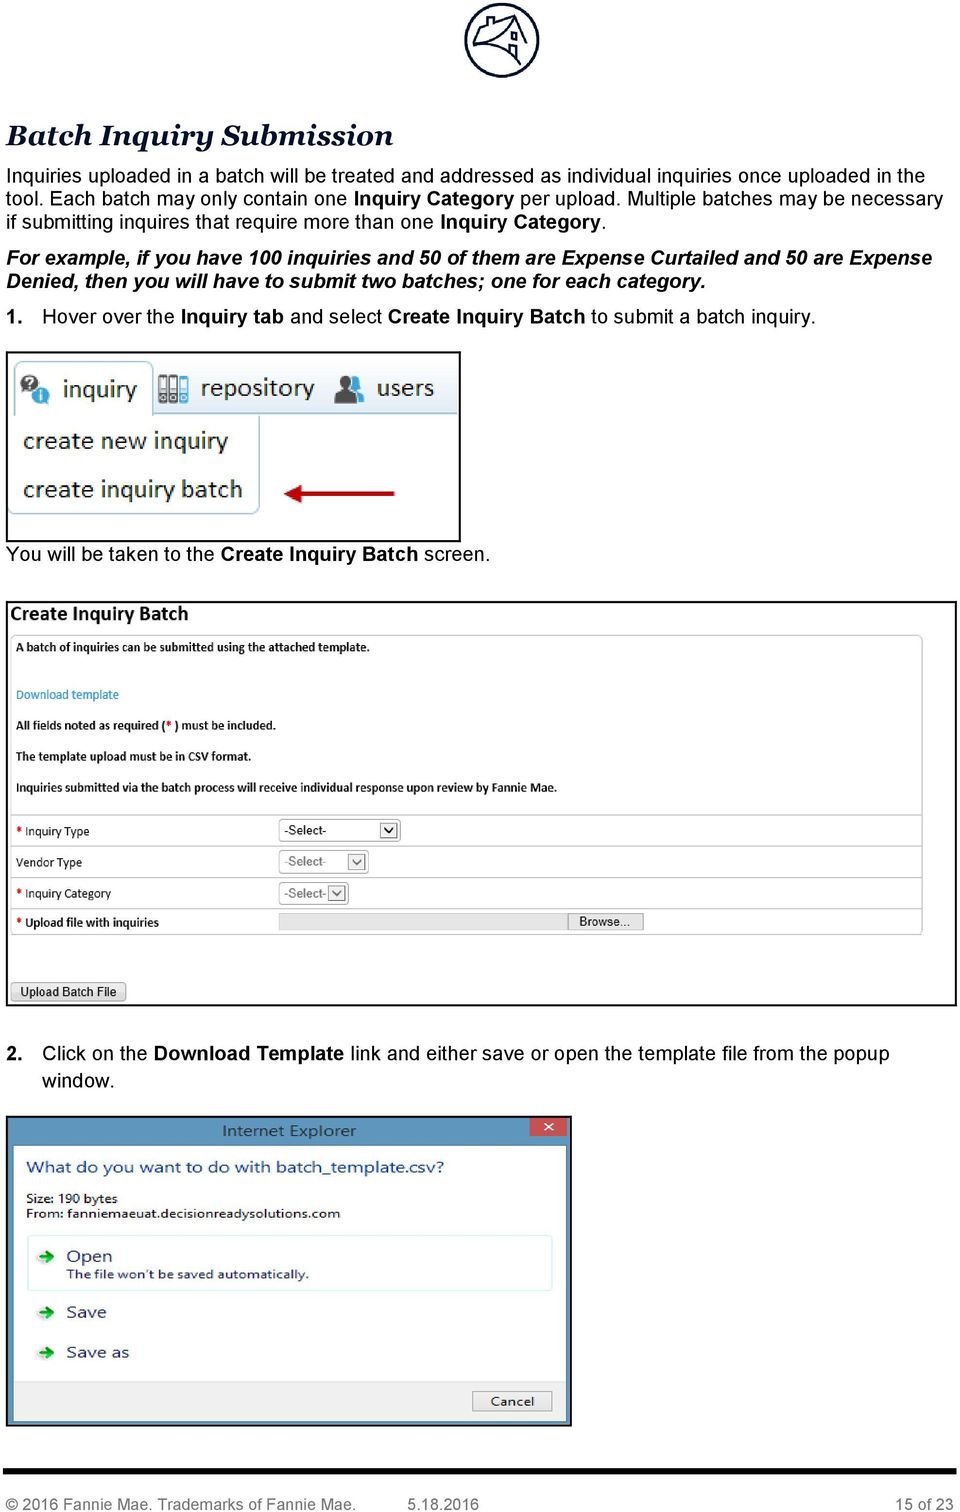 For example, if you have 100 inquiries and 50 of them are Expense Curtailed and 50 are Expense Denied, then you will have to submit two batches; one for each category. 1. Hover over the Inquiry tab and select Create Inquiry Batch to submit a batch inquiry.